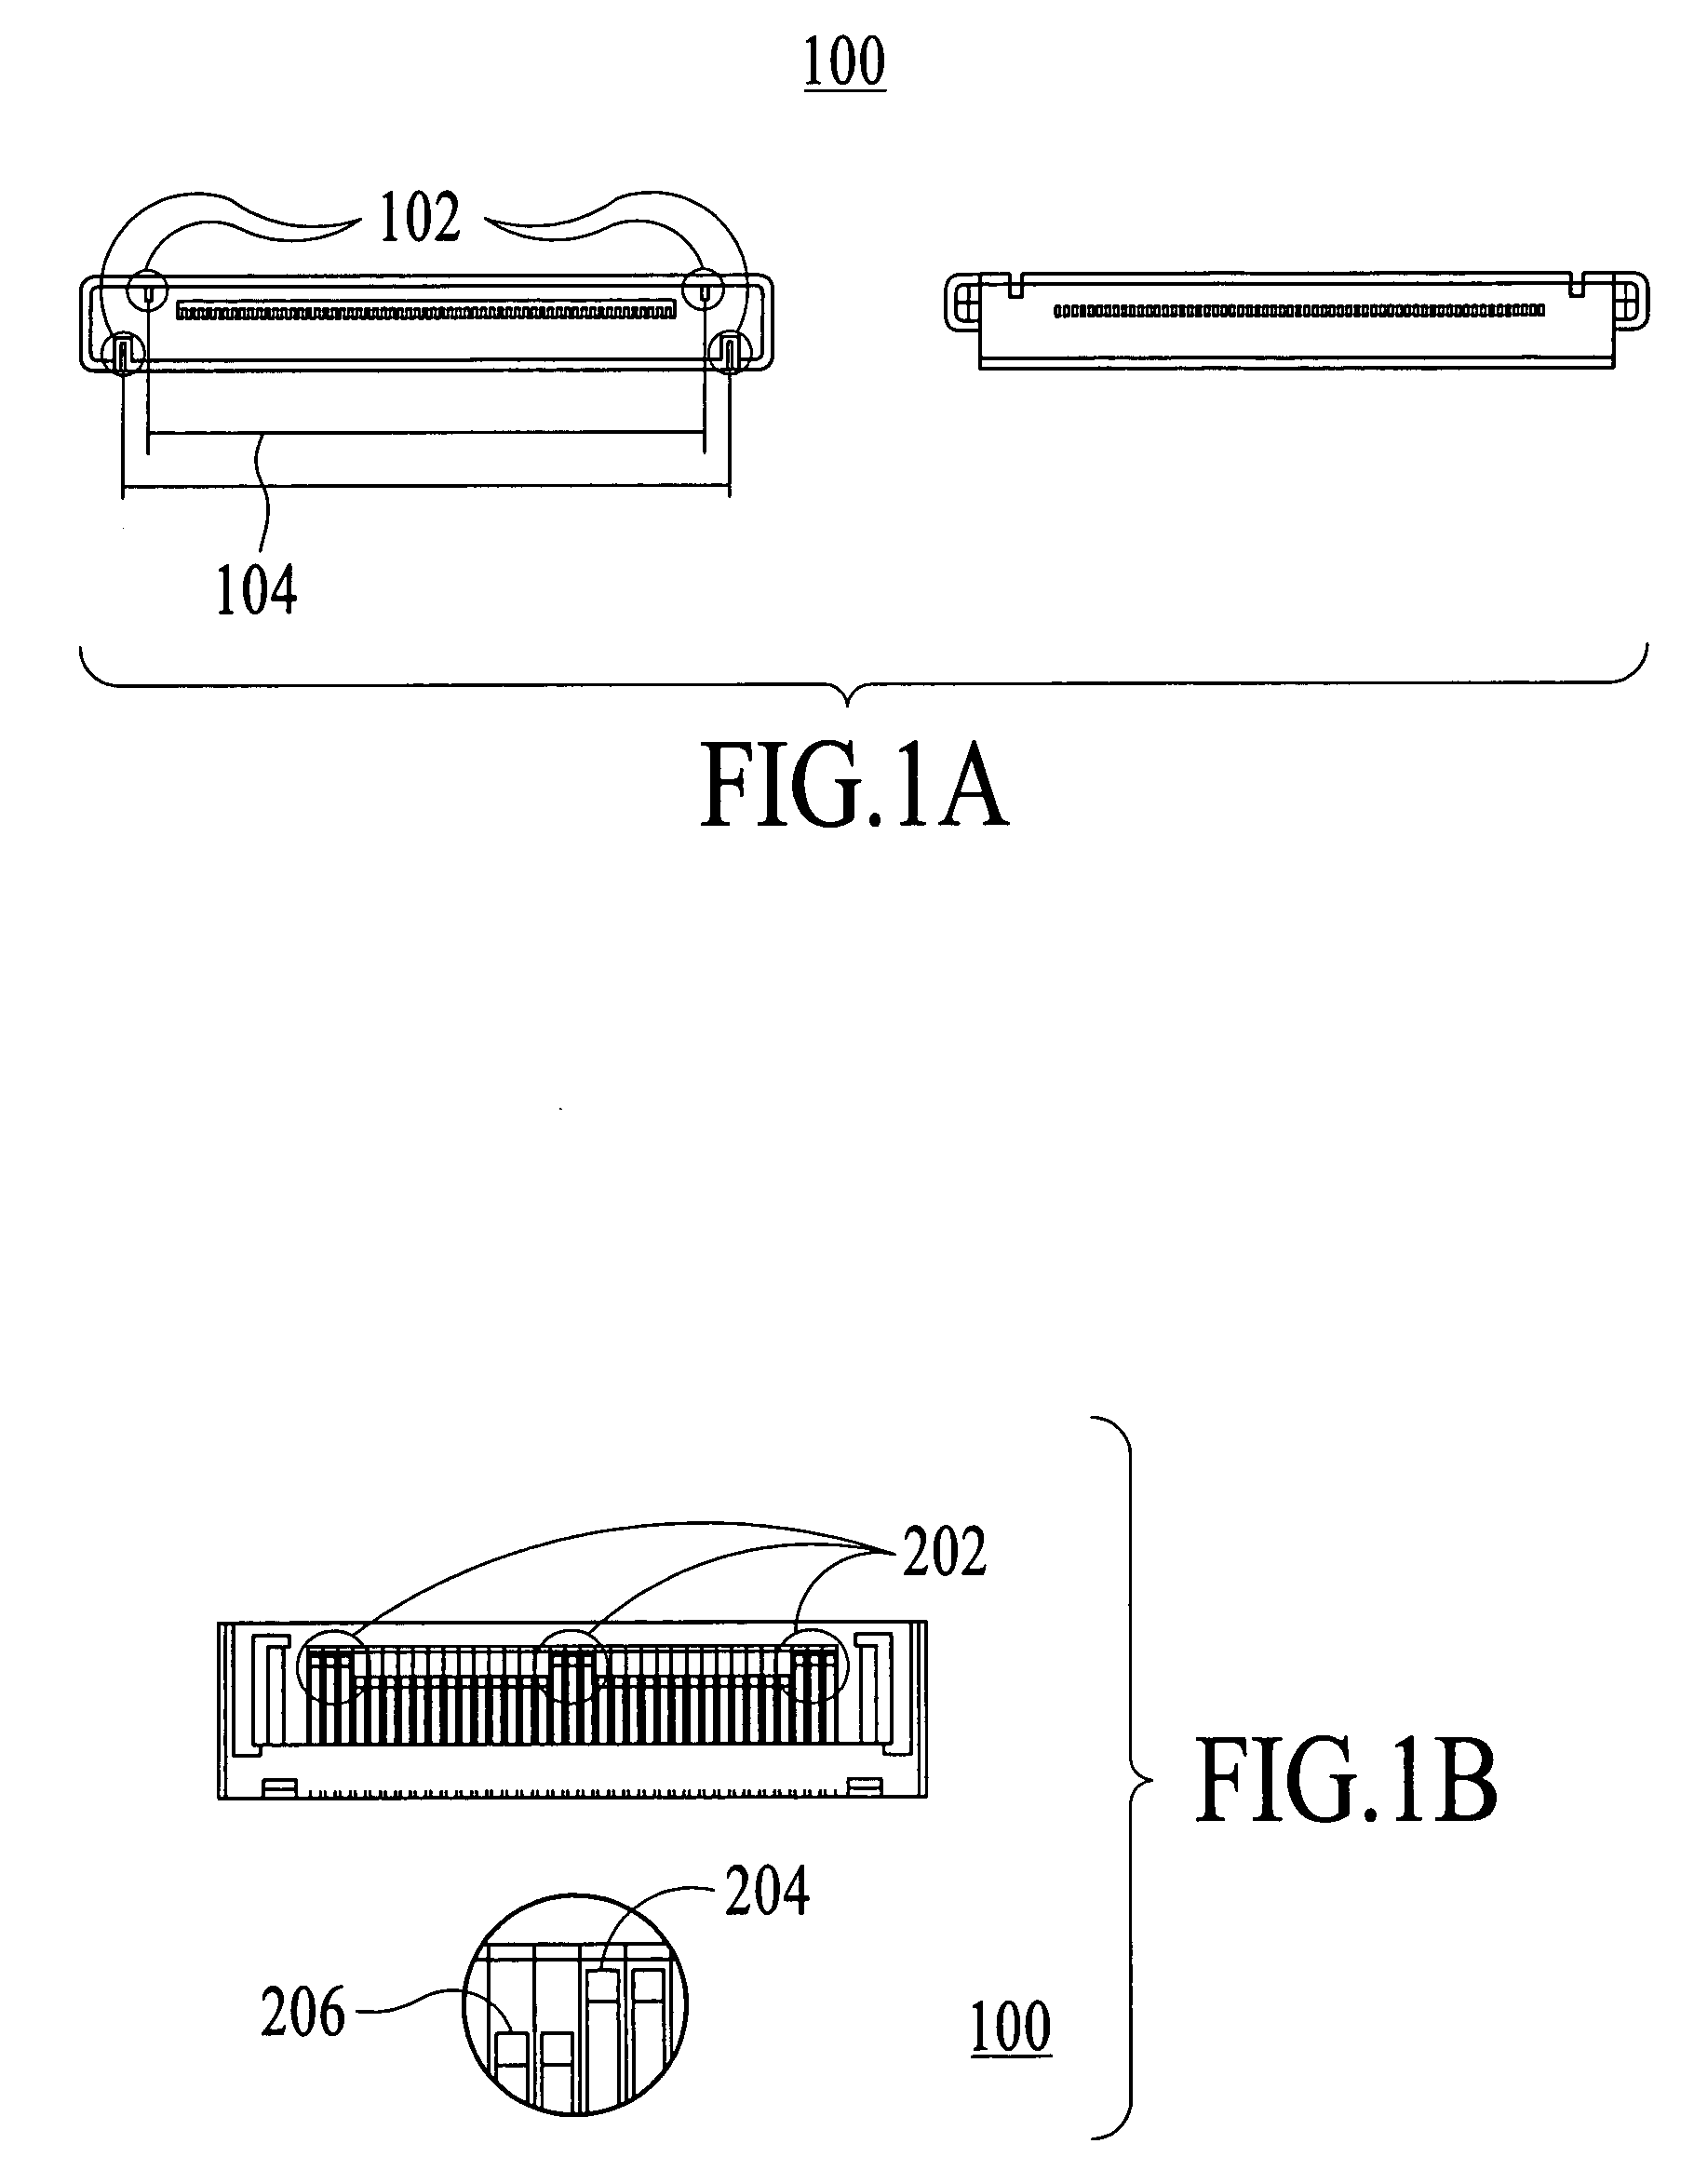 Connector interface system for a multi-communication device